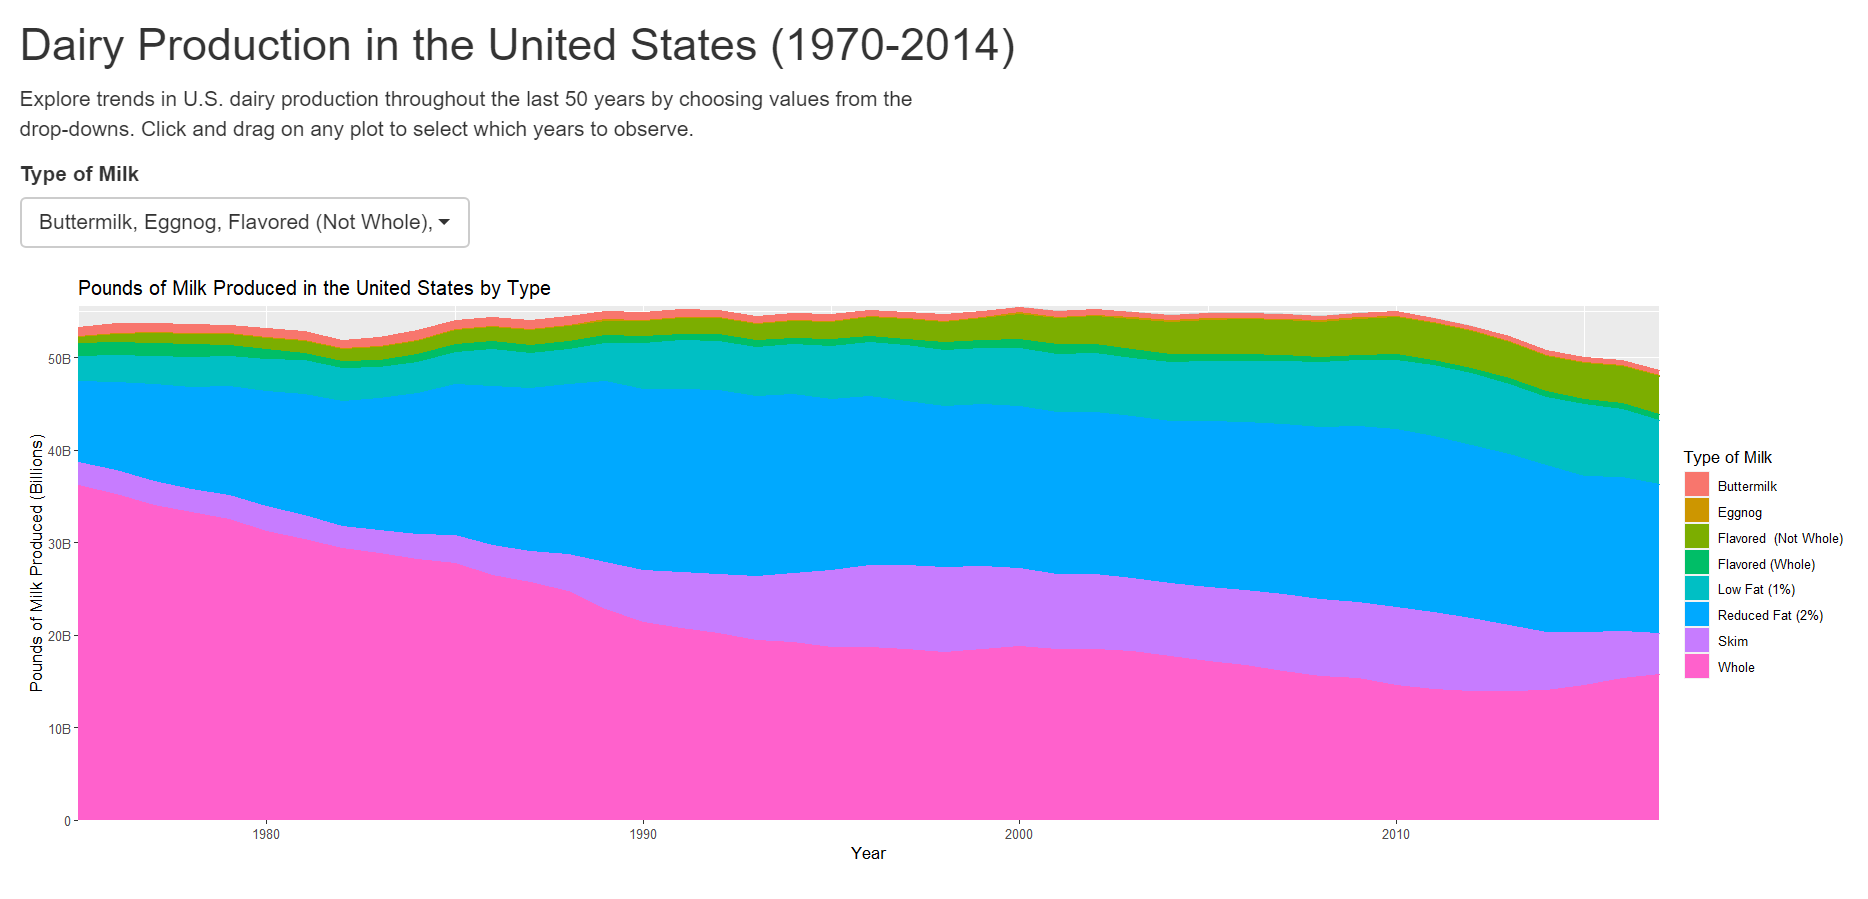 Dairy Production in the United States (1970-2014)